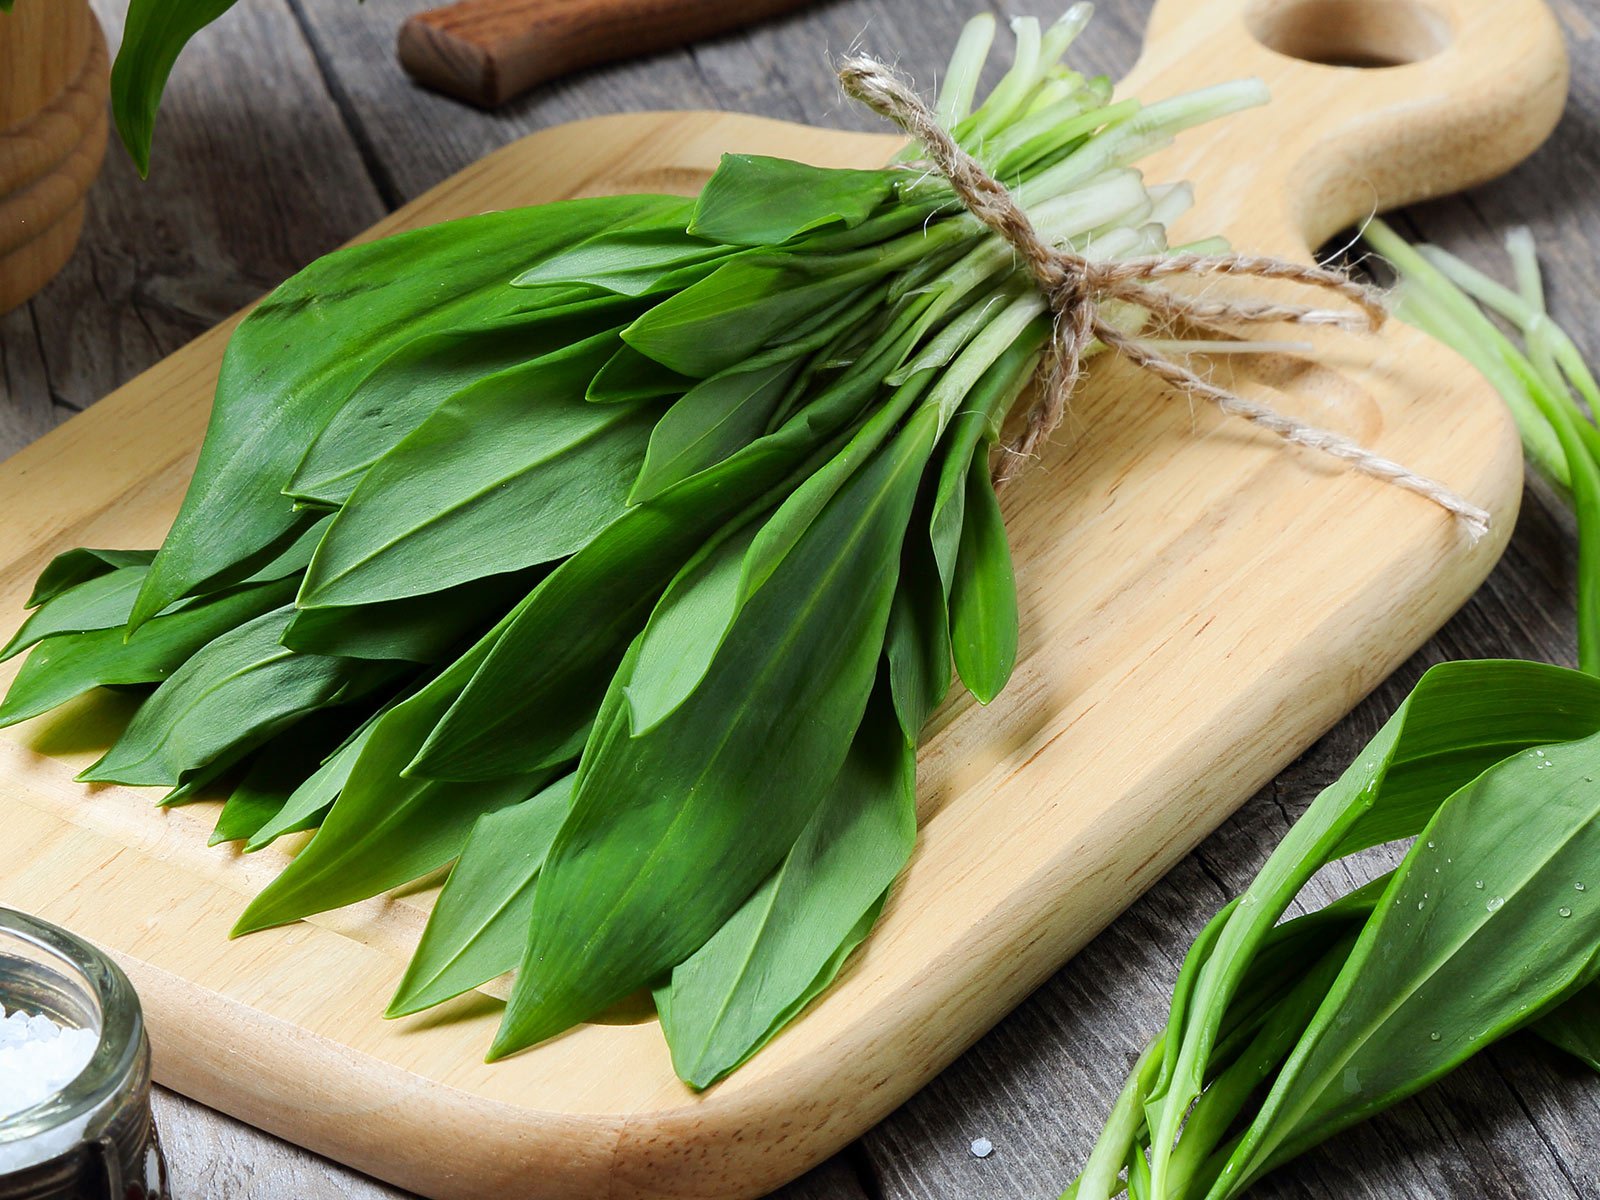 Fresh wild garlic is best collected in the forest or grown in the garden.